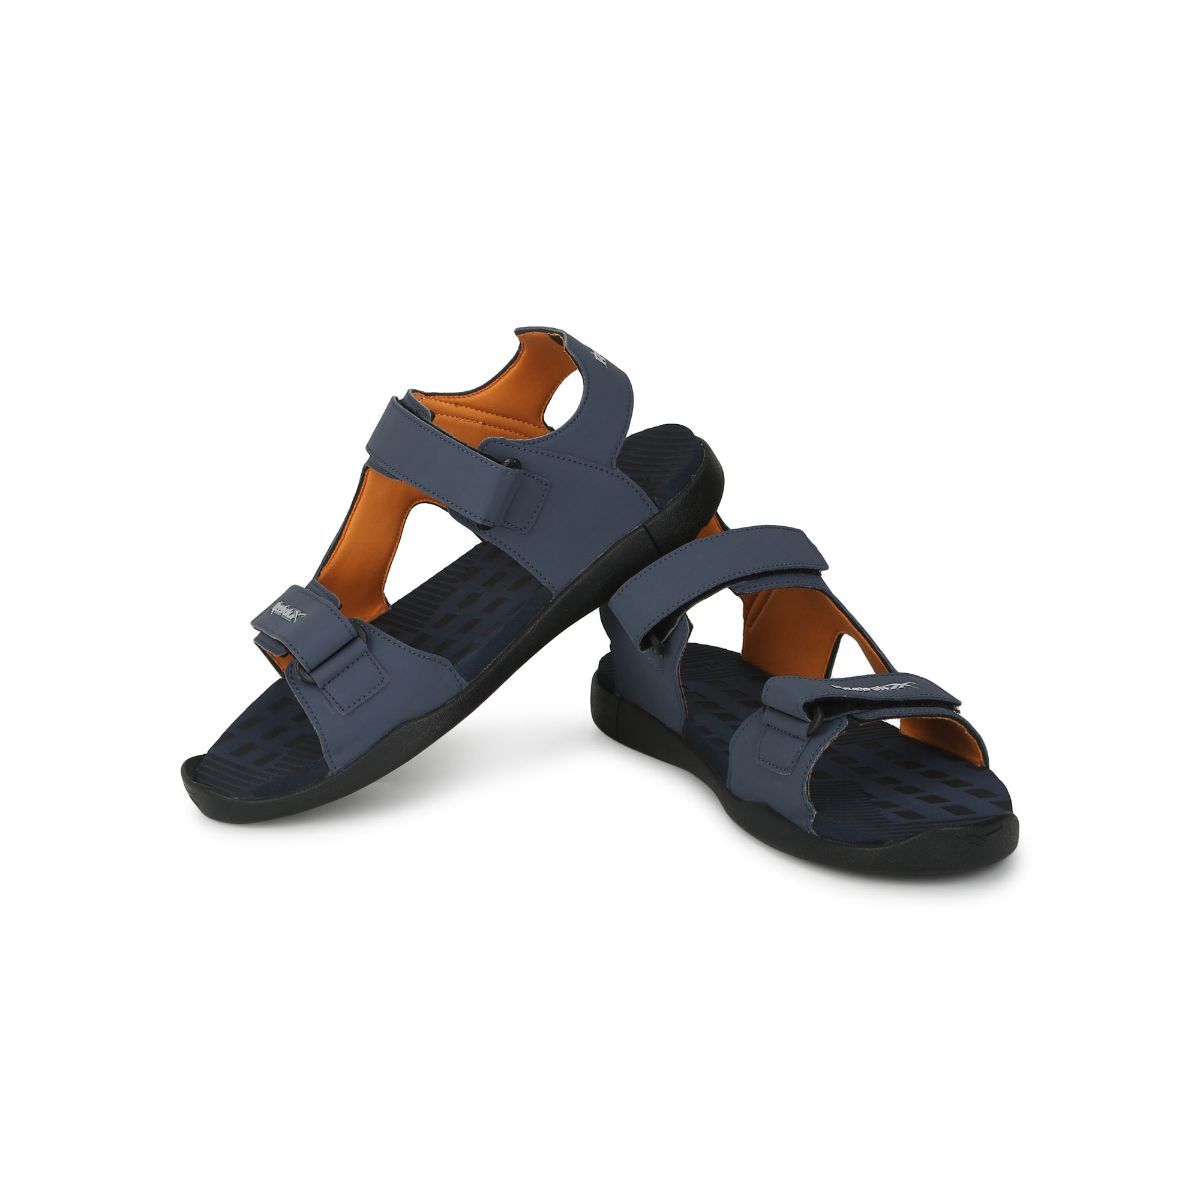 Bata - Bata Men's Sandal For Men Call for Order: 09678772828 | 01951104444|  Free Home Delivery | Free Returns Price: TK 1390 Product Code: 8614163  Available Color: Brown Available Sizes: 6,7,8,9,10 | 40,41,42,43,44  Material : Synthetic | Facebook